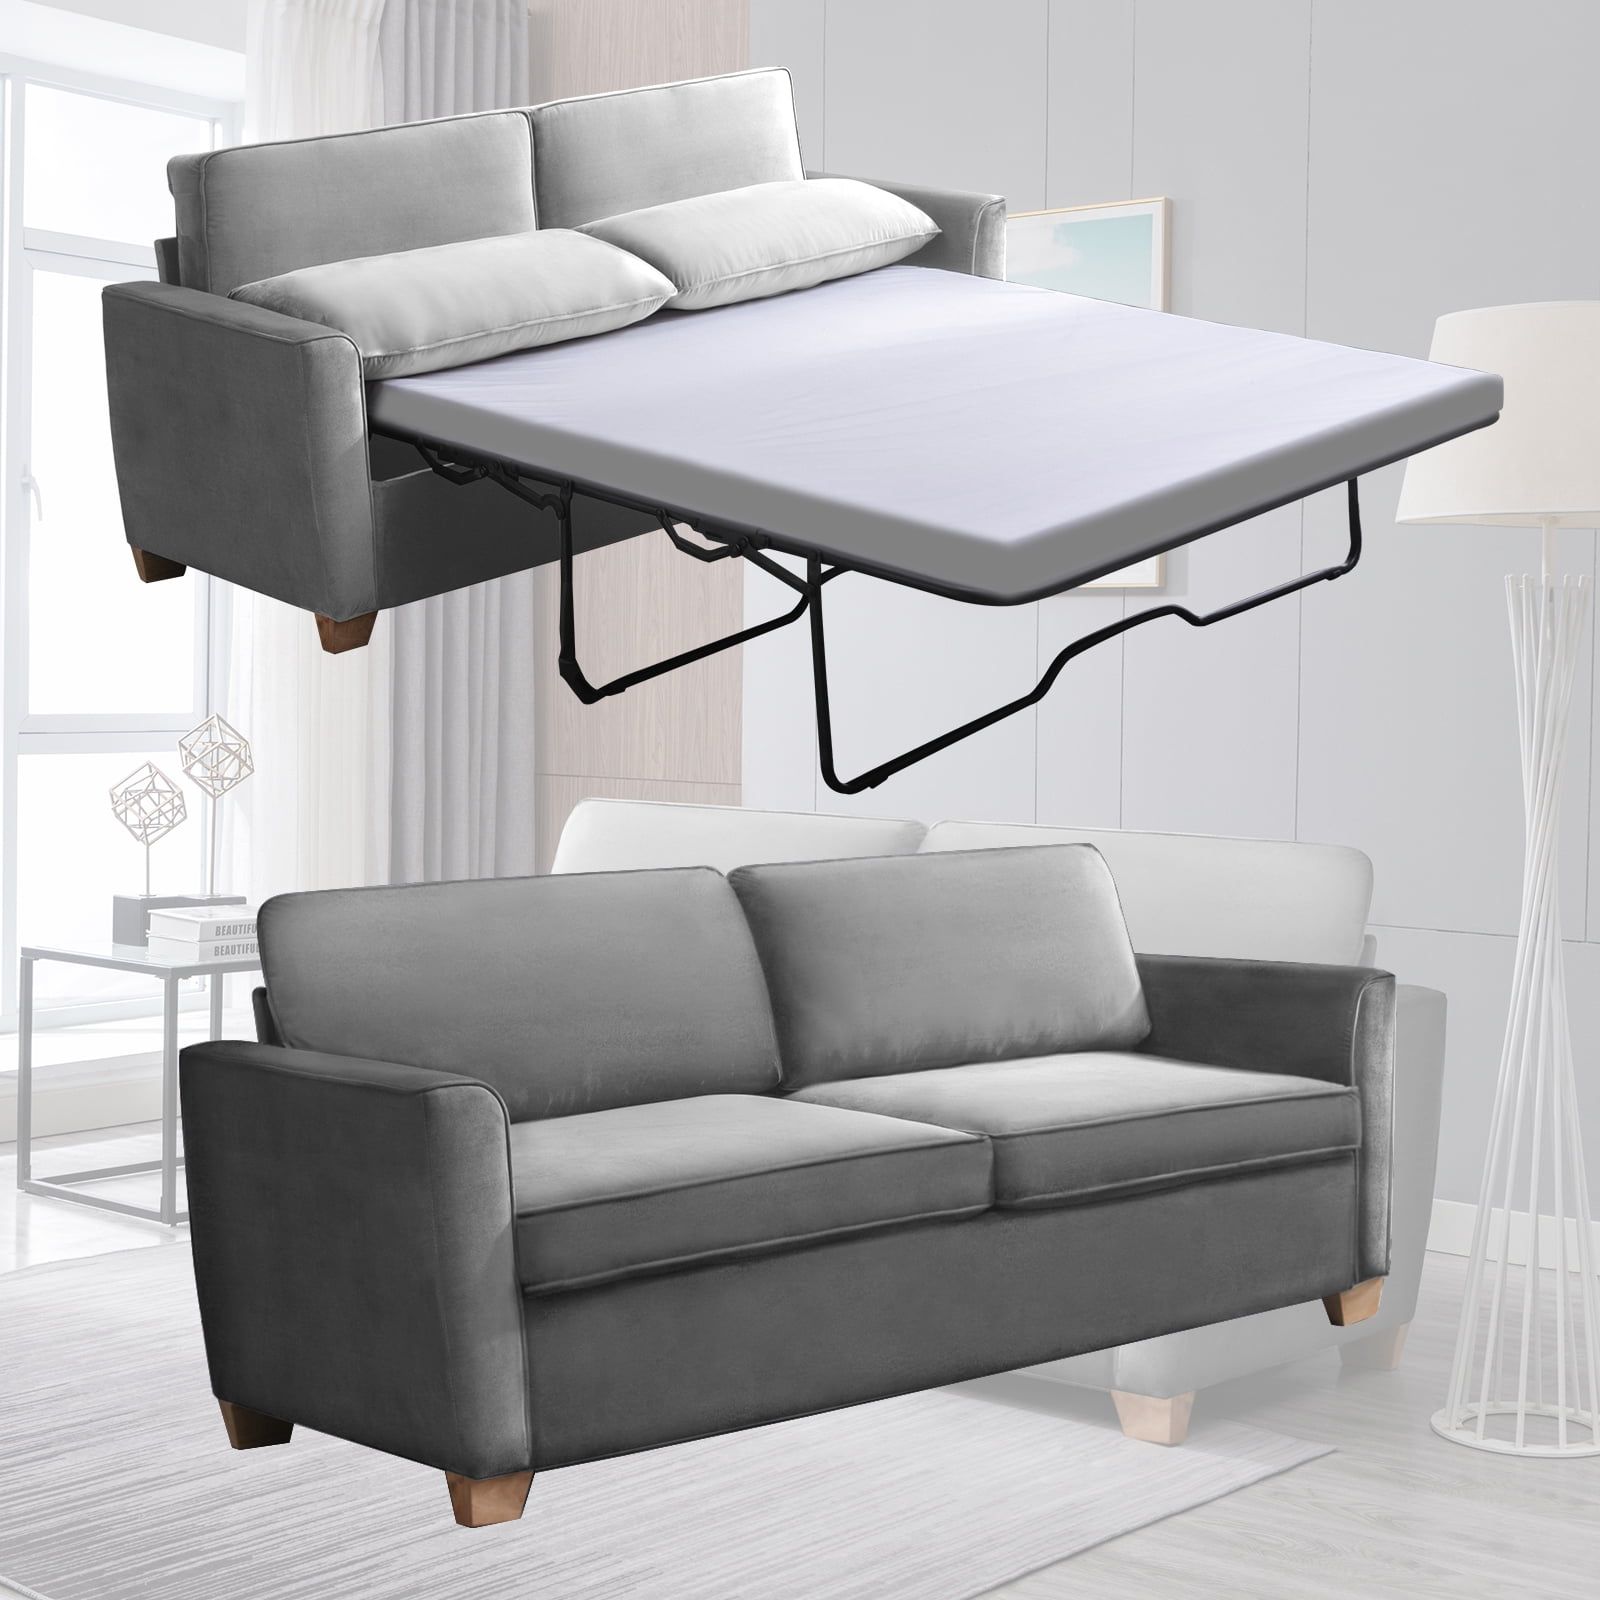 Mixoy 2 In 1 Pull Out Sofa Bed, Velvet Loveseat Sleeper Sofa Bed With  Folding Mattress, Pull Out Couch Bed Suitable For Living Room, Full Size Sofa  Sleeper For Apartment/Small Spaces (Full,Dark Grey) – In 2 In 1 Gray Pull Out Sofa Beds (View 6 of 15)